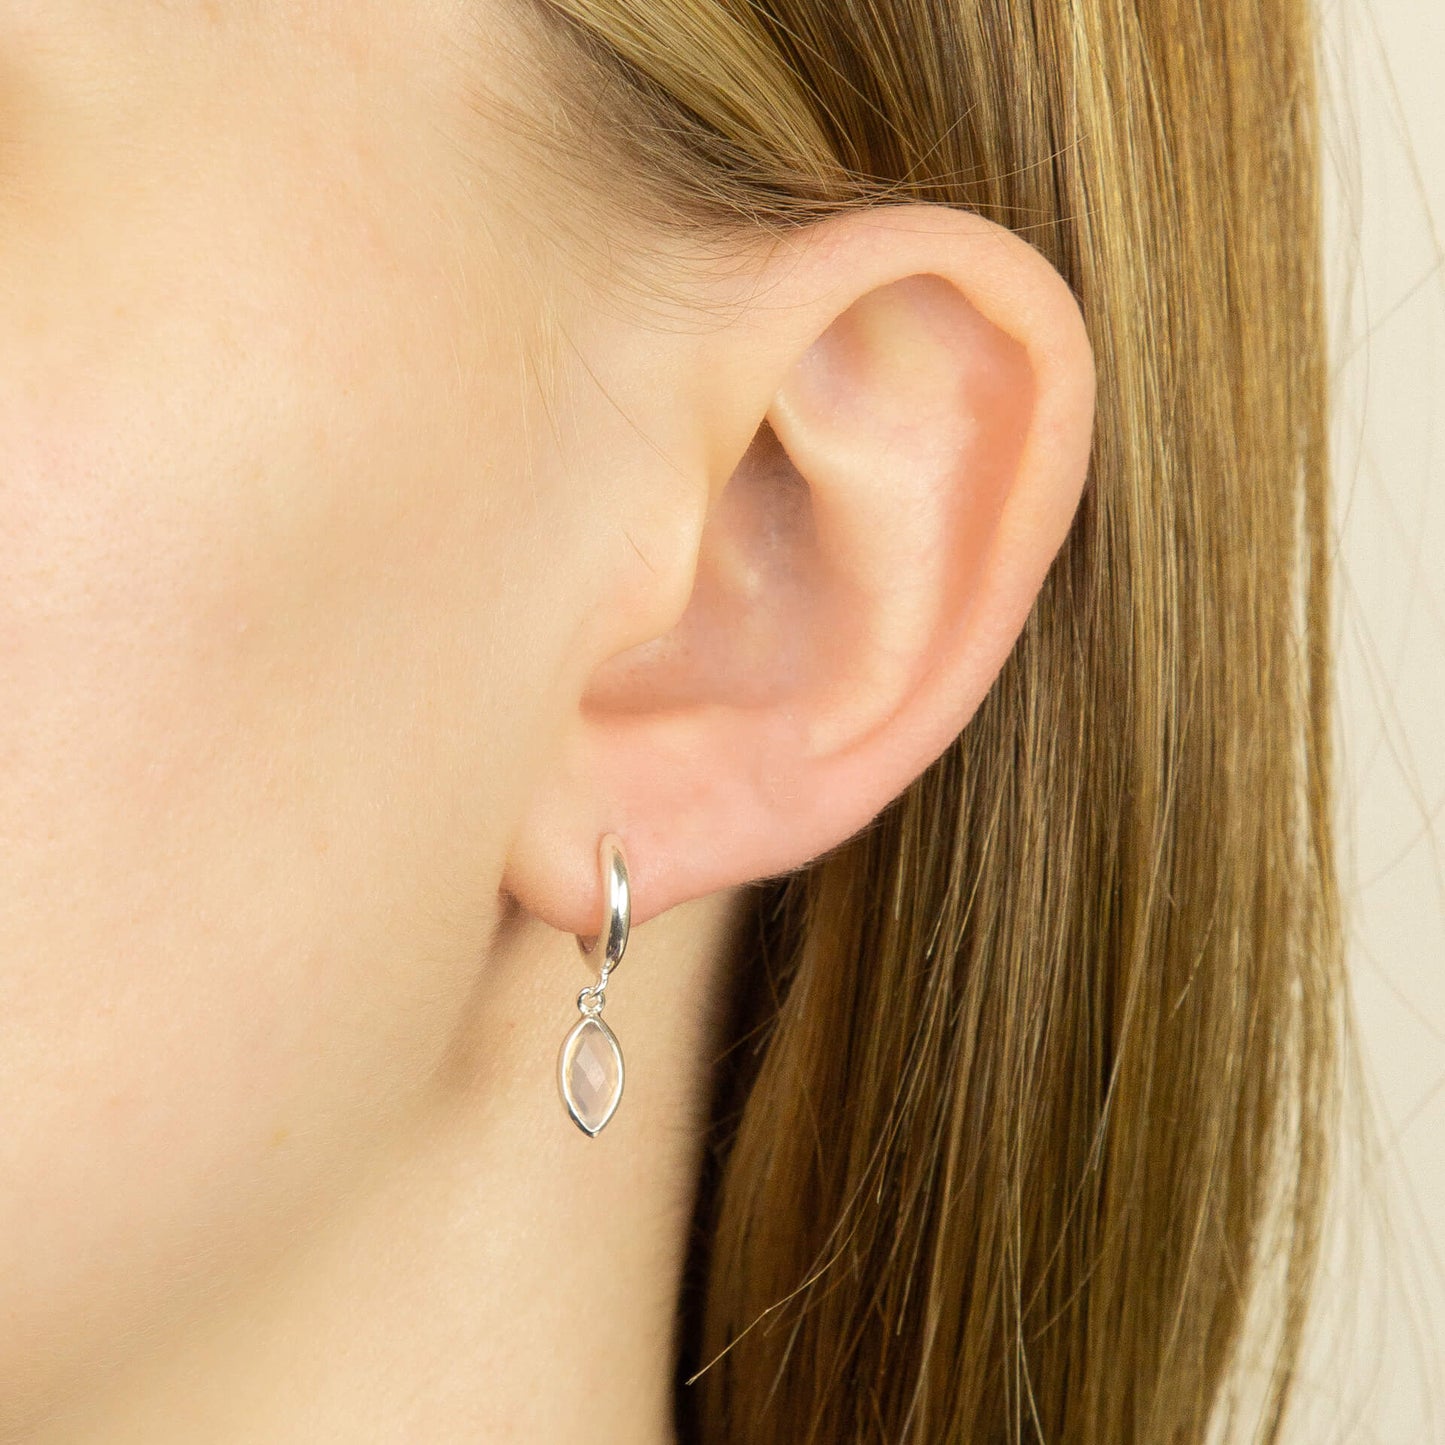 Recycled Silver Hoop Earrings With Marquise Pink Chalcedony Charm